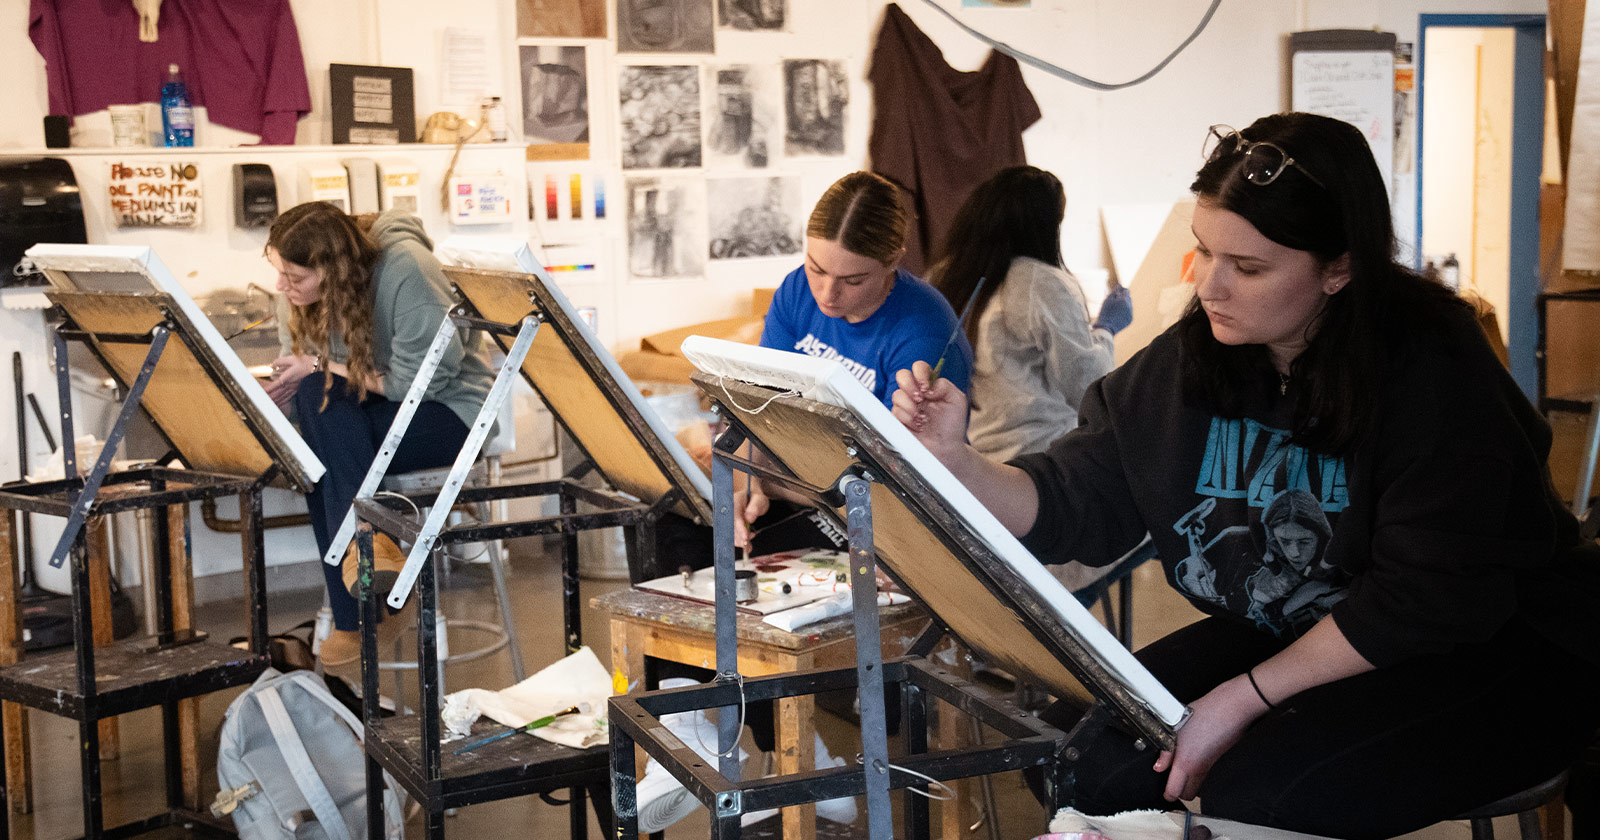 Students work on sketching during an art course at Assumption University's D'Amour College of Liberal Arts and Sciences.